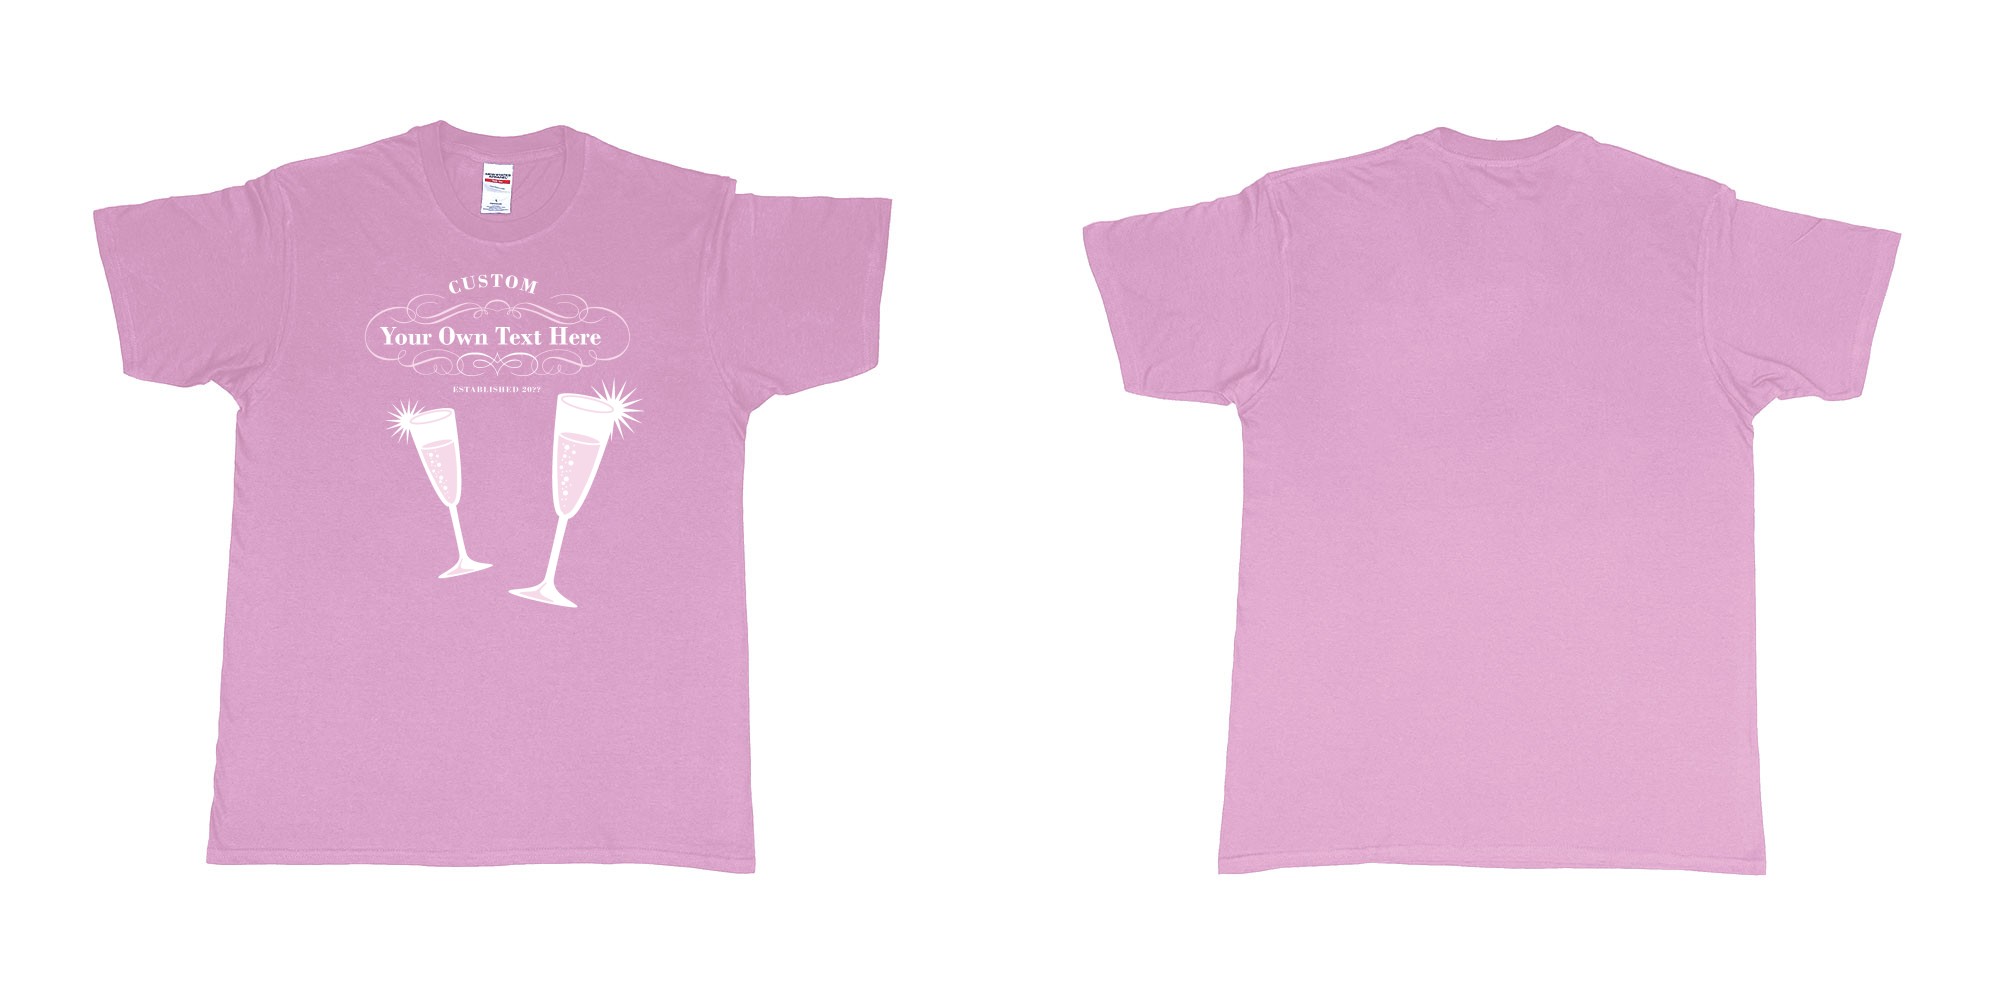 Custom tshirt design laurent perrier champagne logo in fabric color light-pink choice your own text made in Bali by The Pirate Way